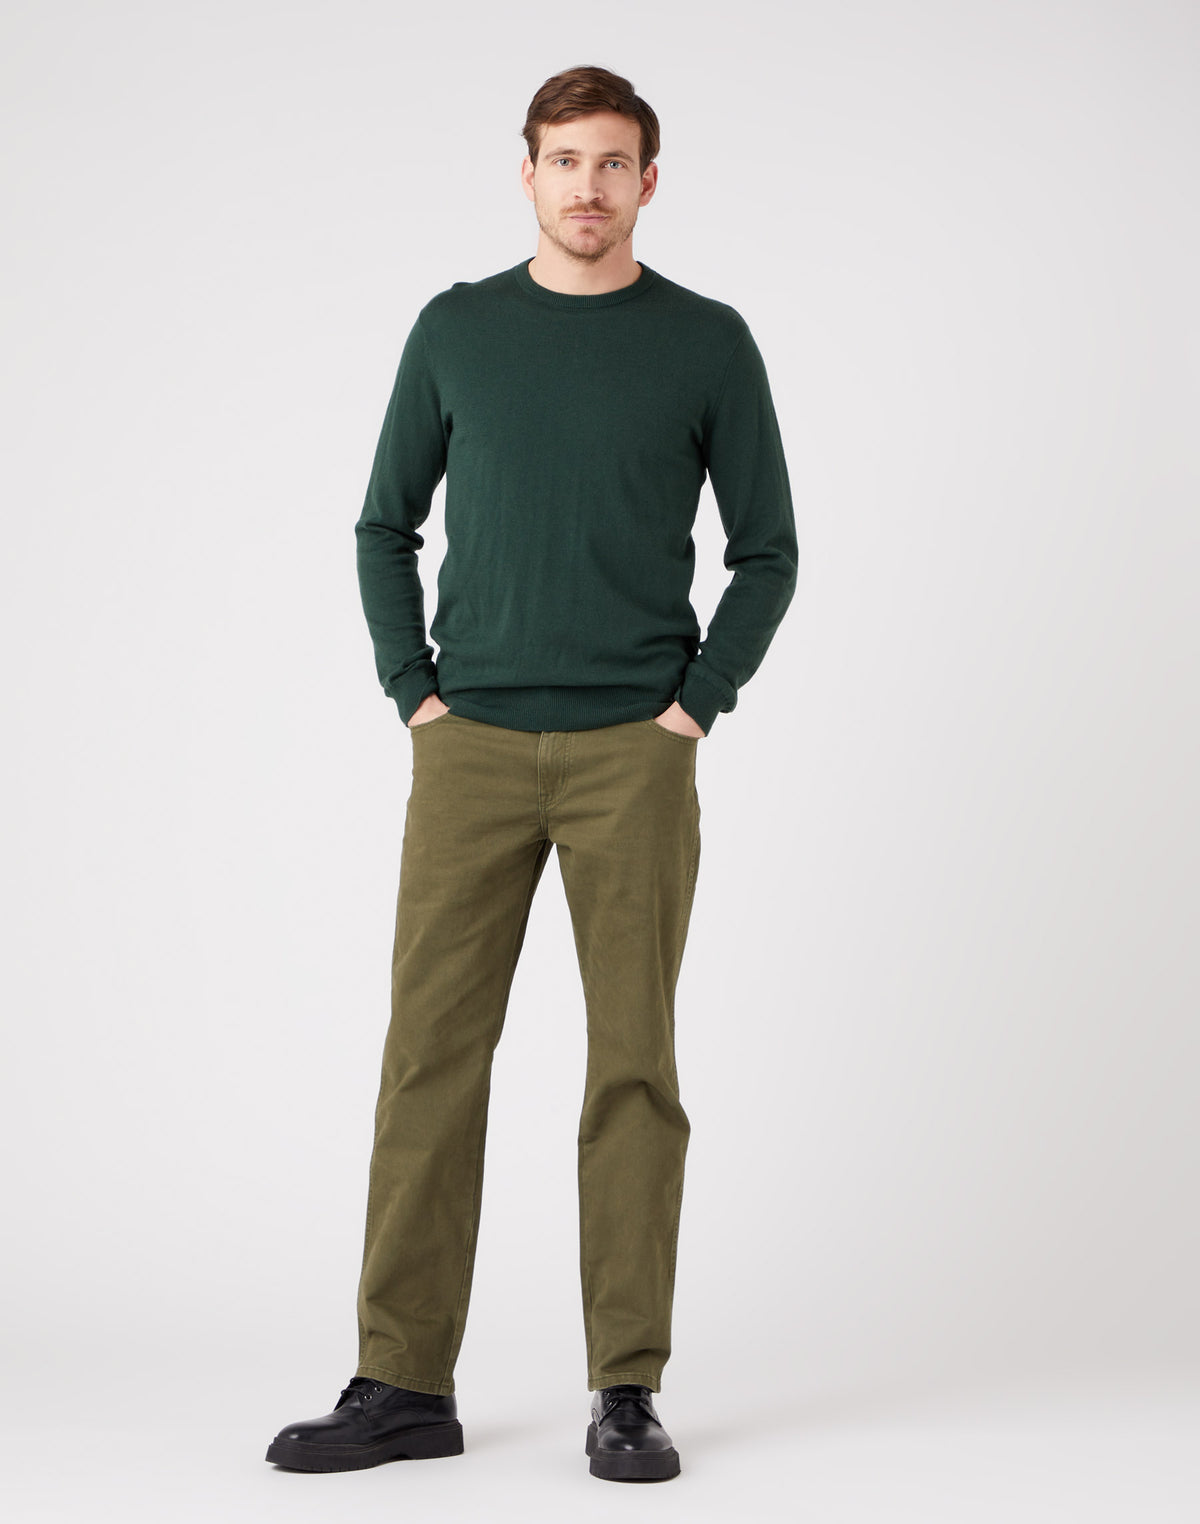 Crewneck Knit in Sycamore Green